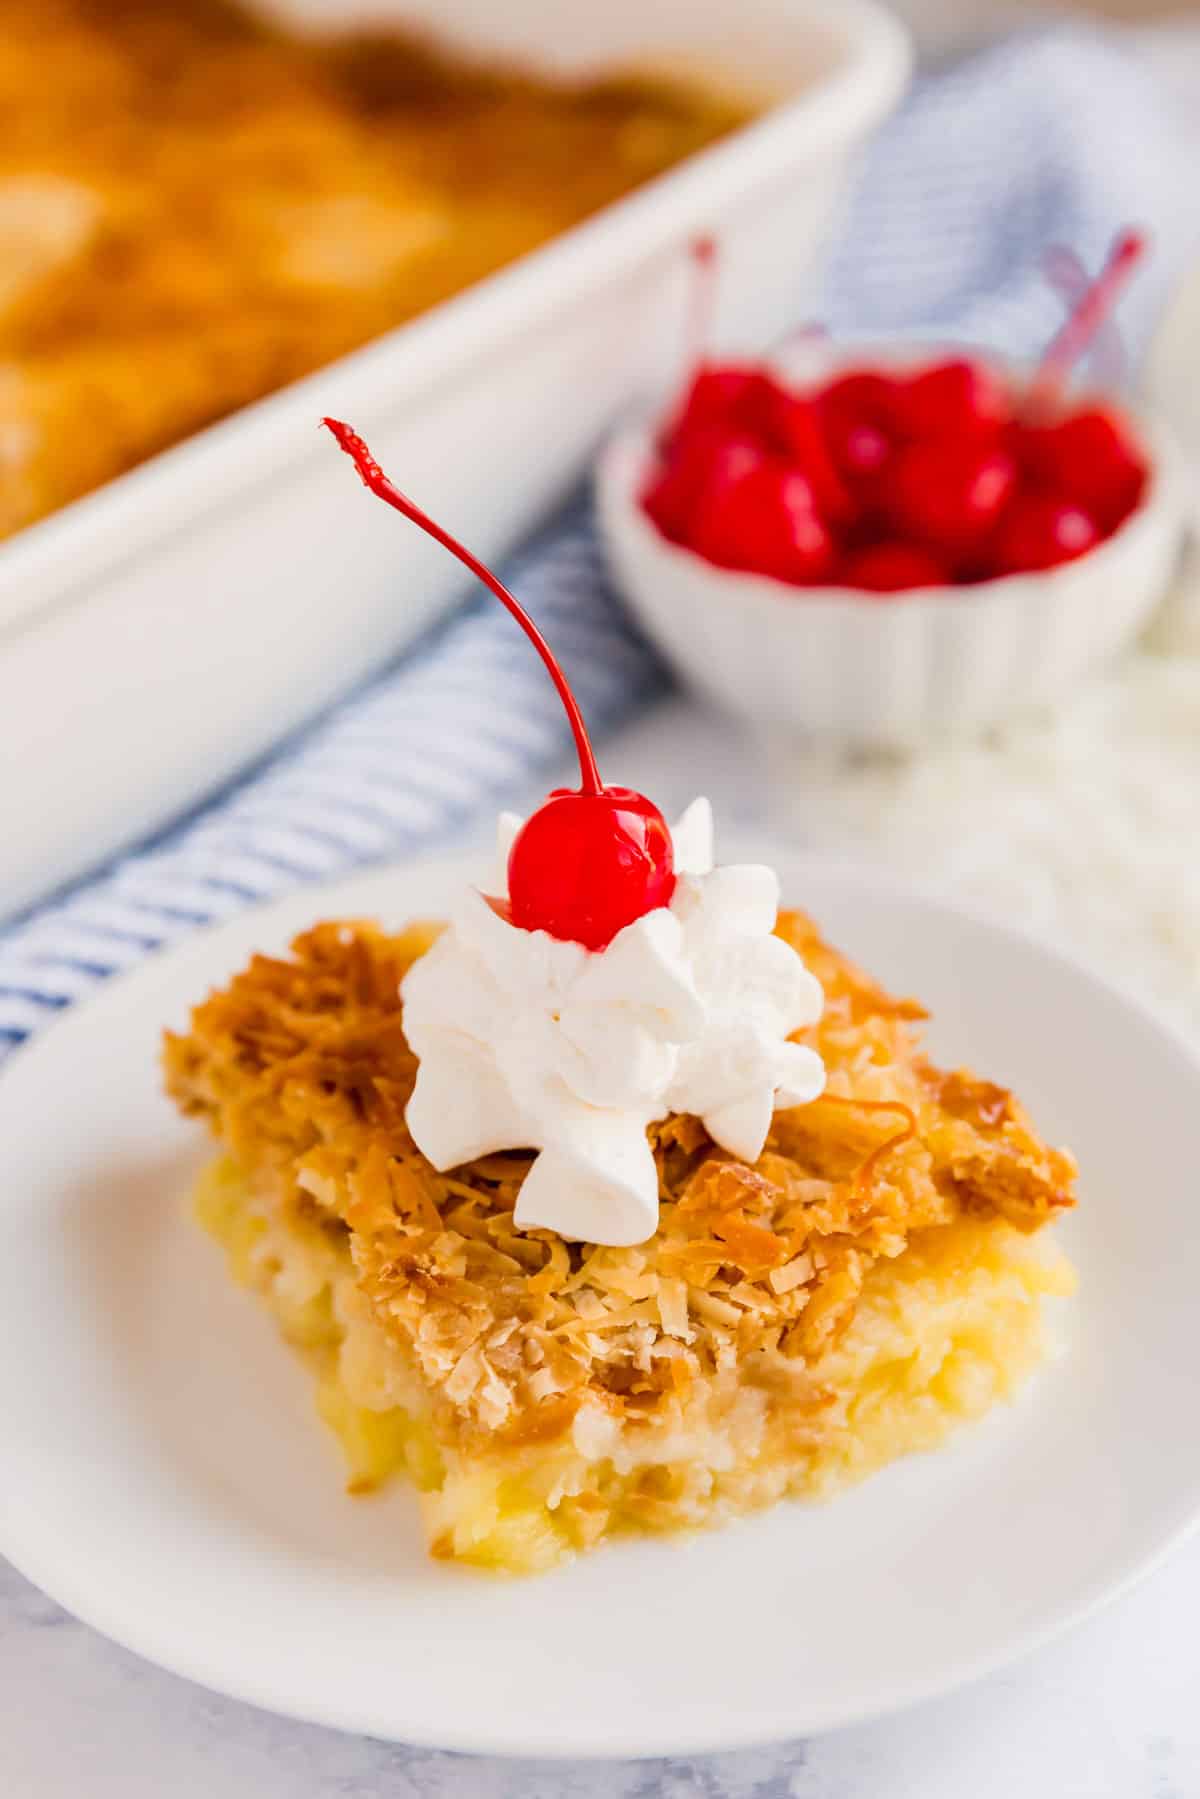 A side angle shot of a pice of dump cake with whipped cream and a cherry on top with a bowl of maraschino cherries and the whole dump cake int he background.